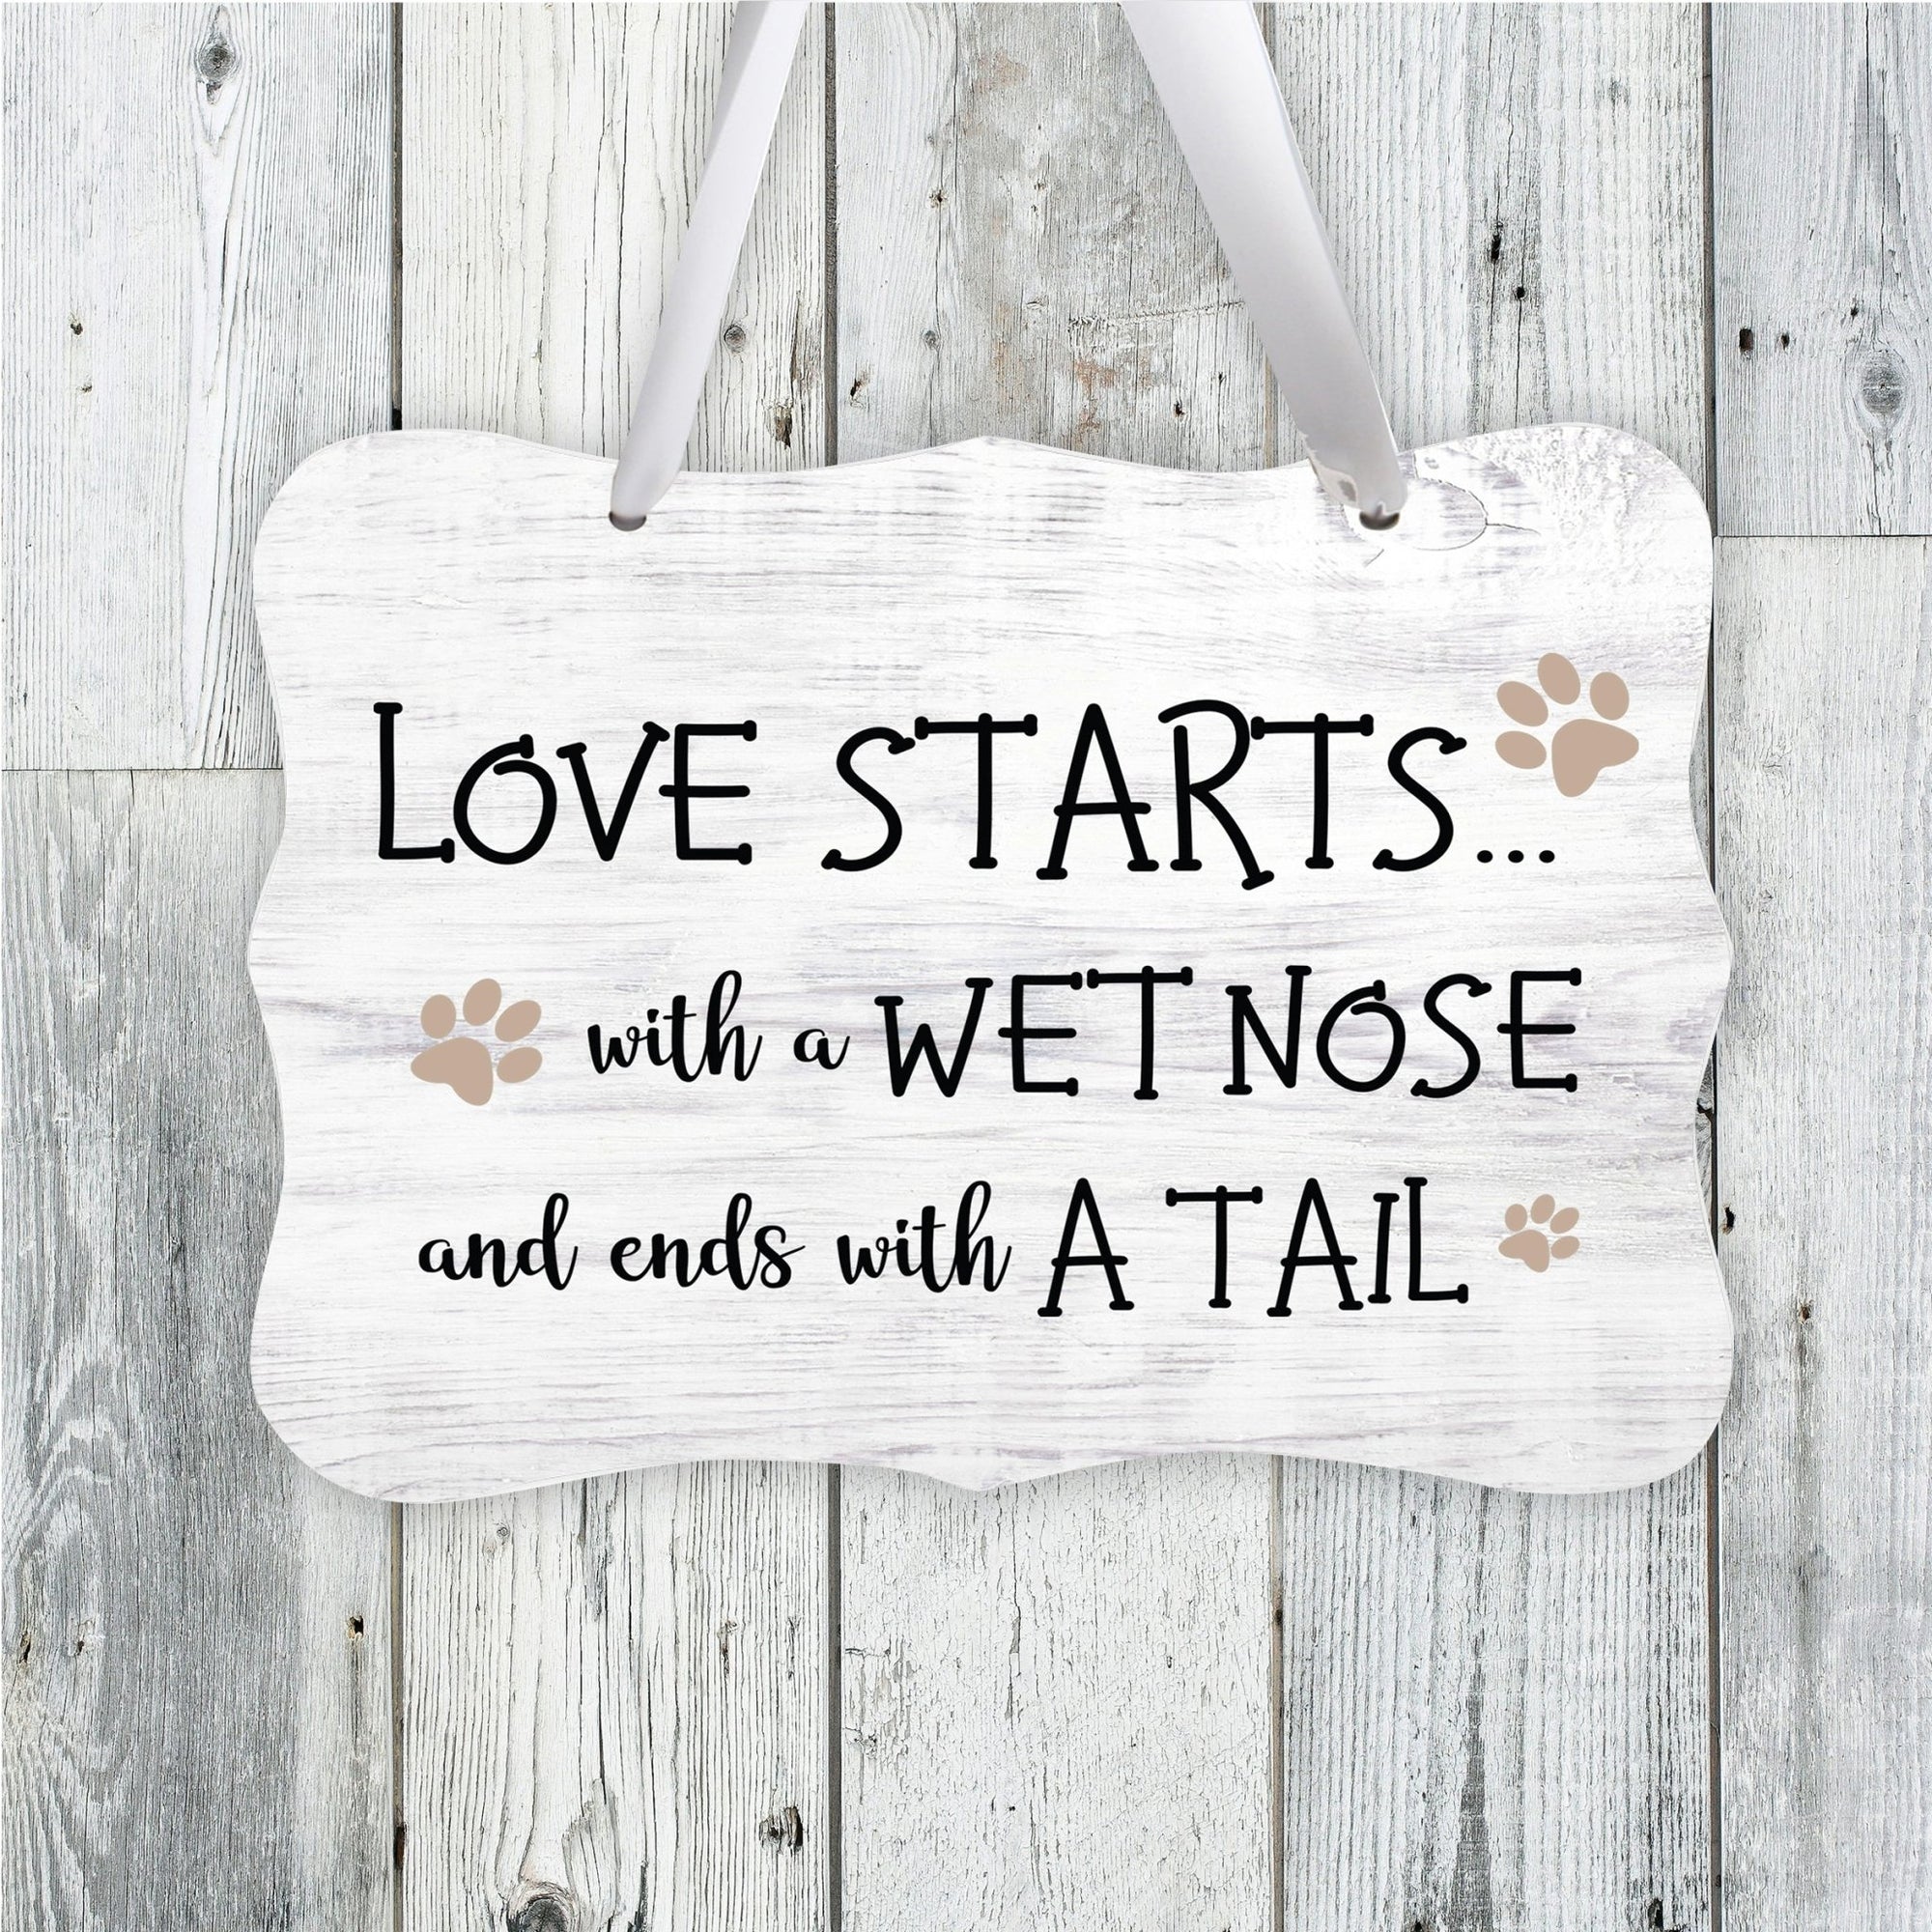 Inspirational Hanging Ribbon Wall Sign for Pet - LifeSong Milestones